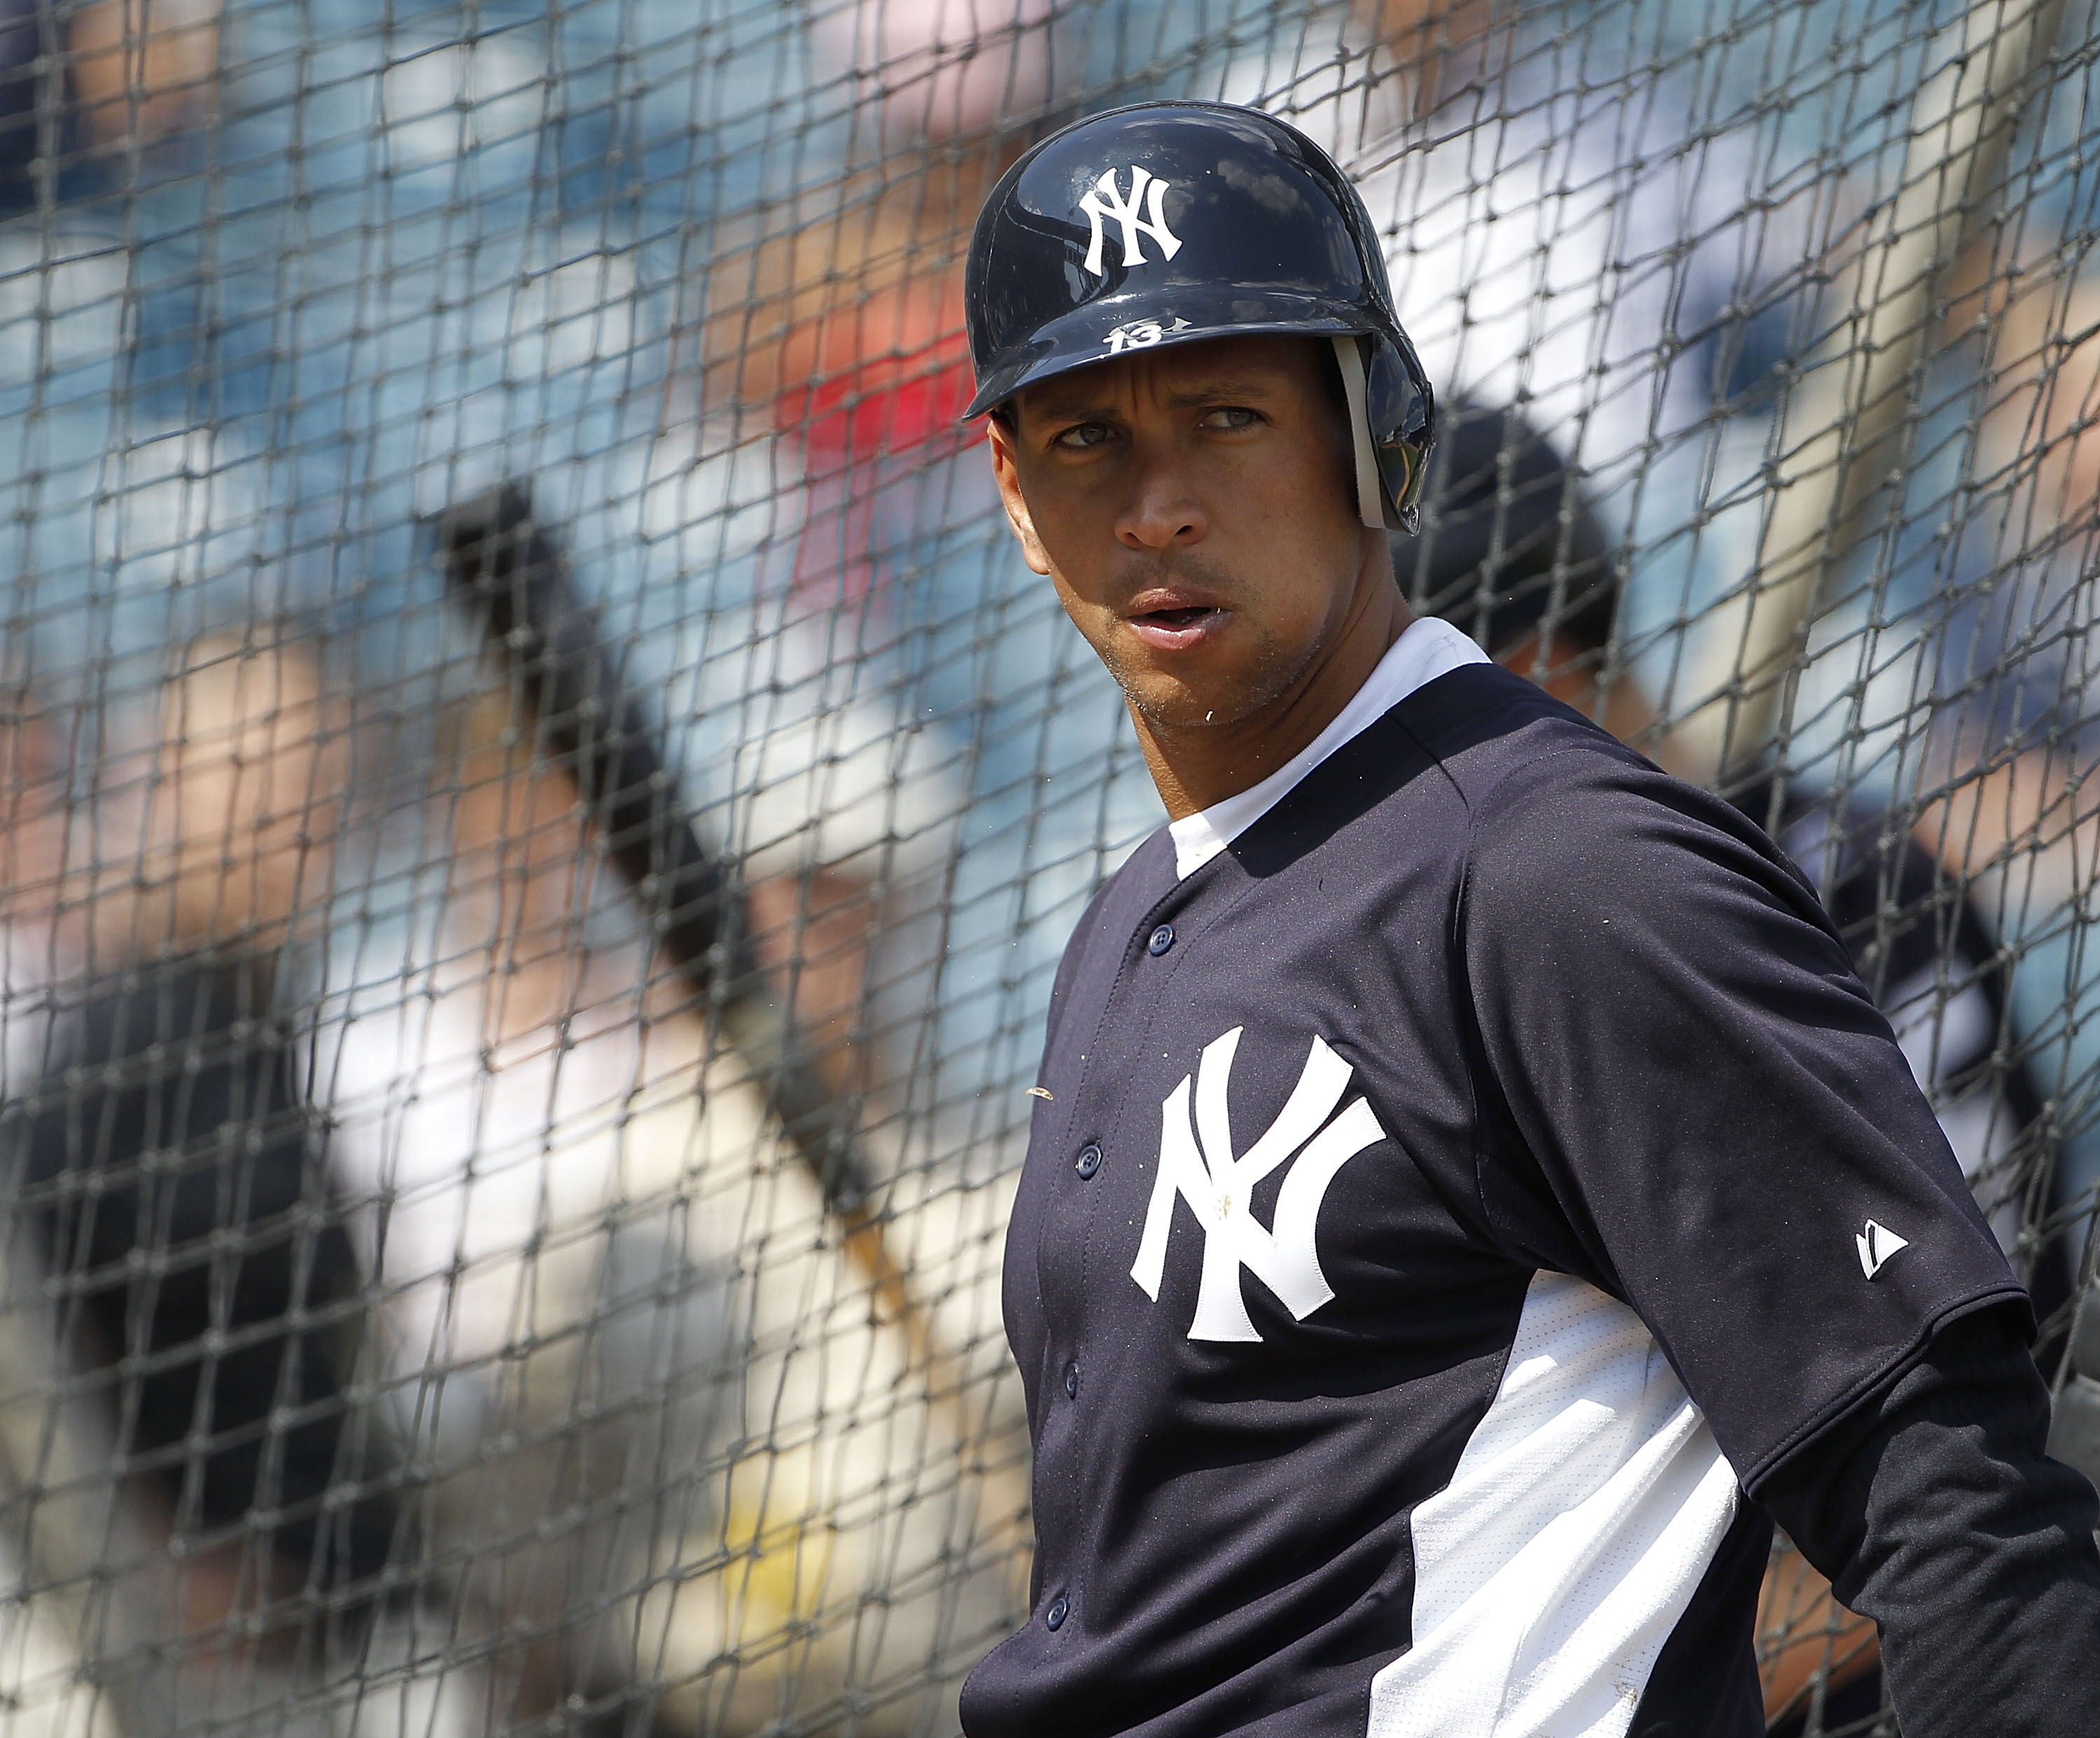 TAMPA, FL - FEBRUARY 20: Alex Rodriguez #13 of the New York Yankees watch the action during the first full team workout of Spring Training on February 20, 2011 at the George M. Steinbrenner Field in Tampa, Florida.  (Photo by Leon Halip/Getty Images)